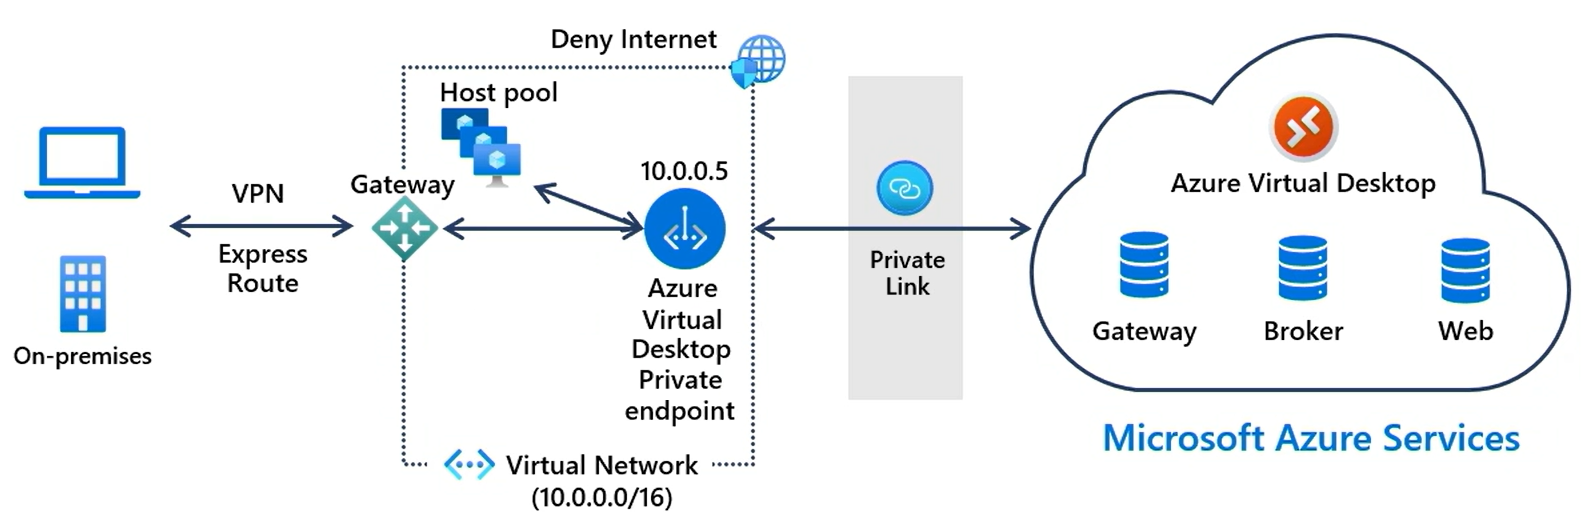 A high-level diagram that shows Private Link connecting a local client to the Azure Virtual Desktop service.